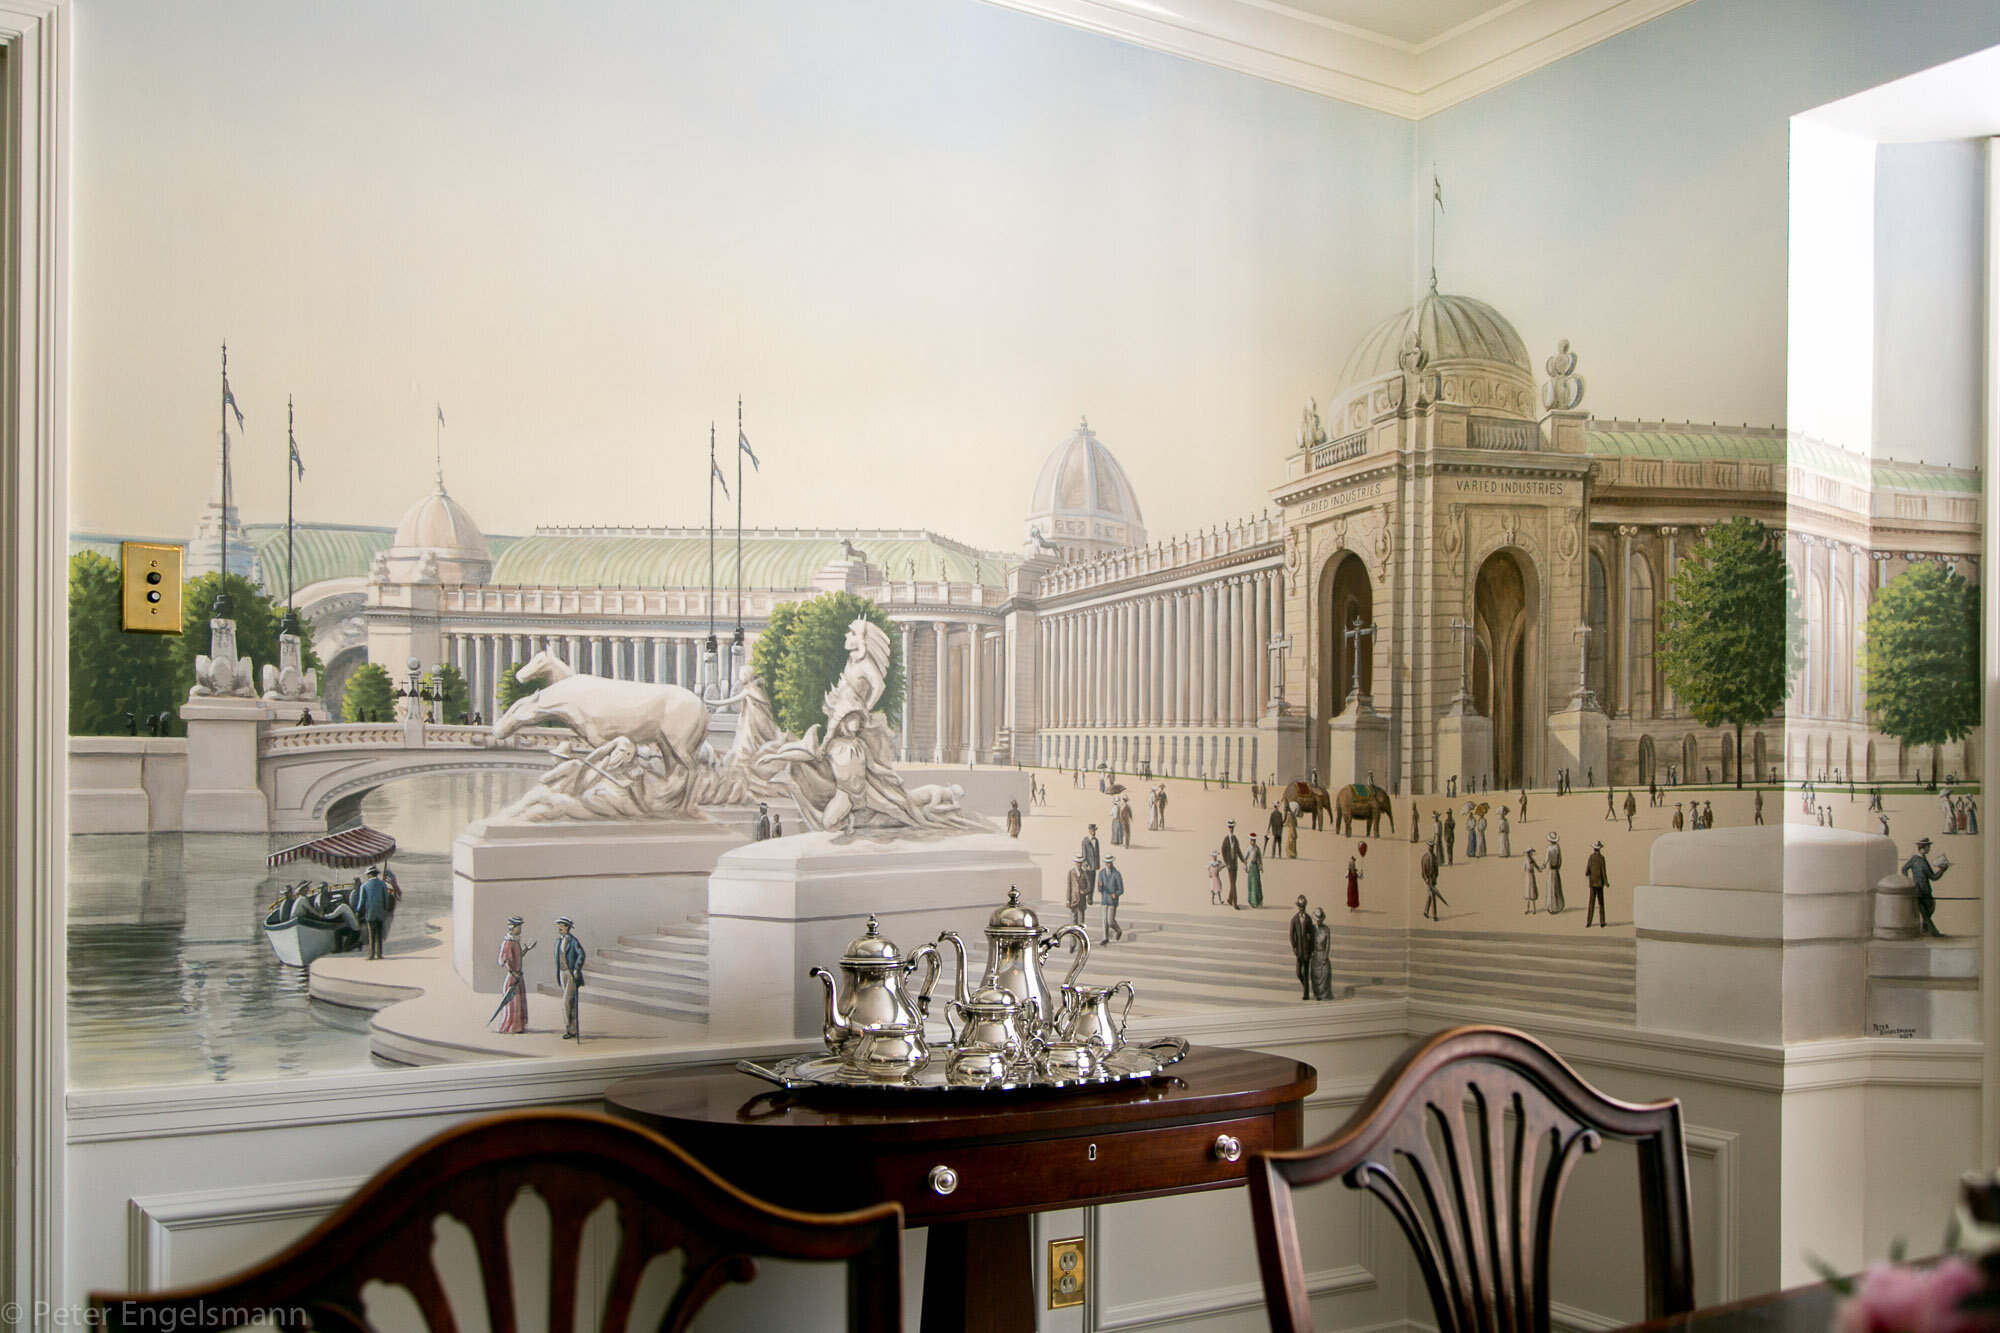  1904 World's Fair Mural, acrylic on wallboard, private residence. © Peter K. Engelsmann 